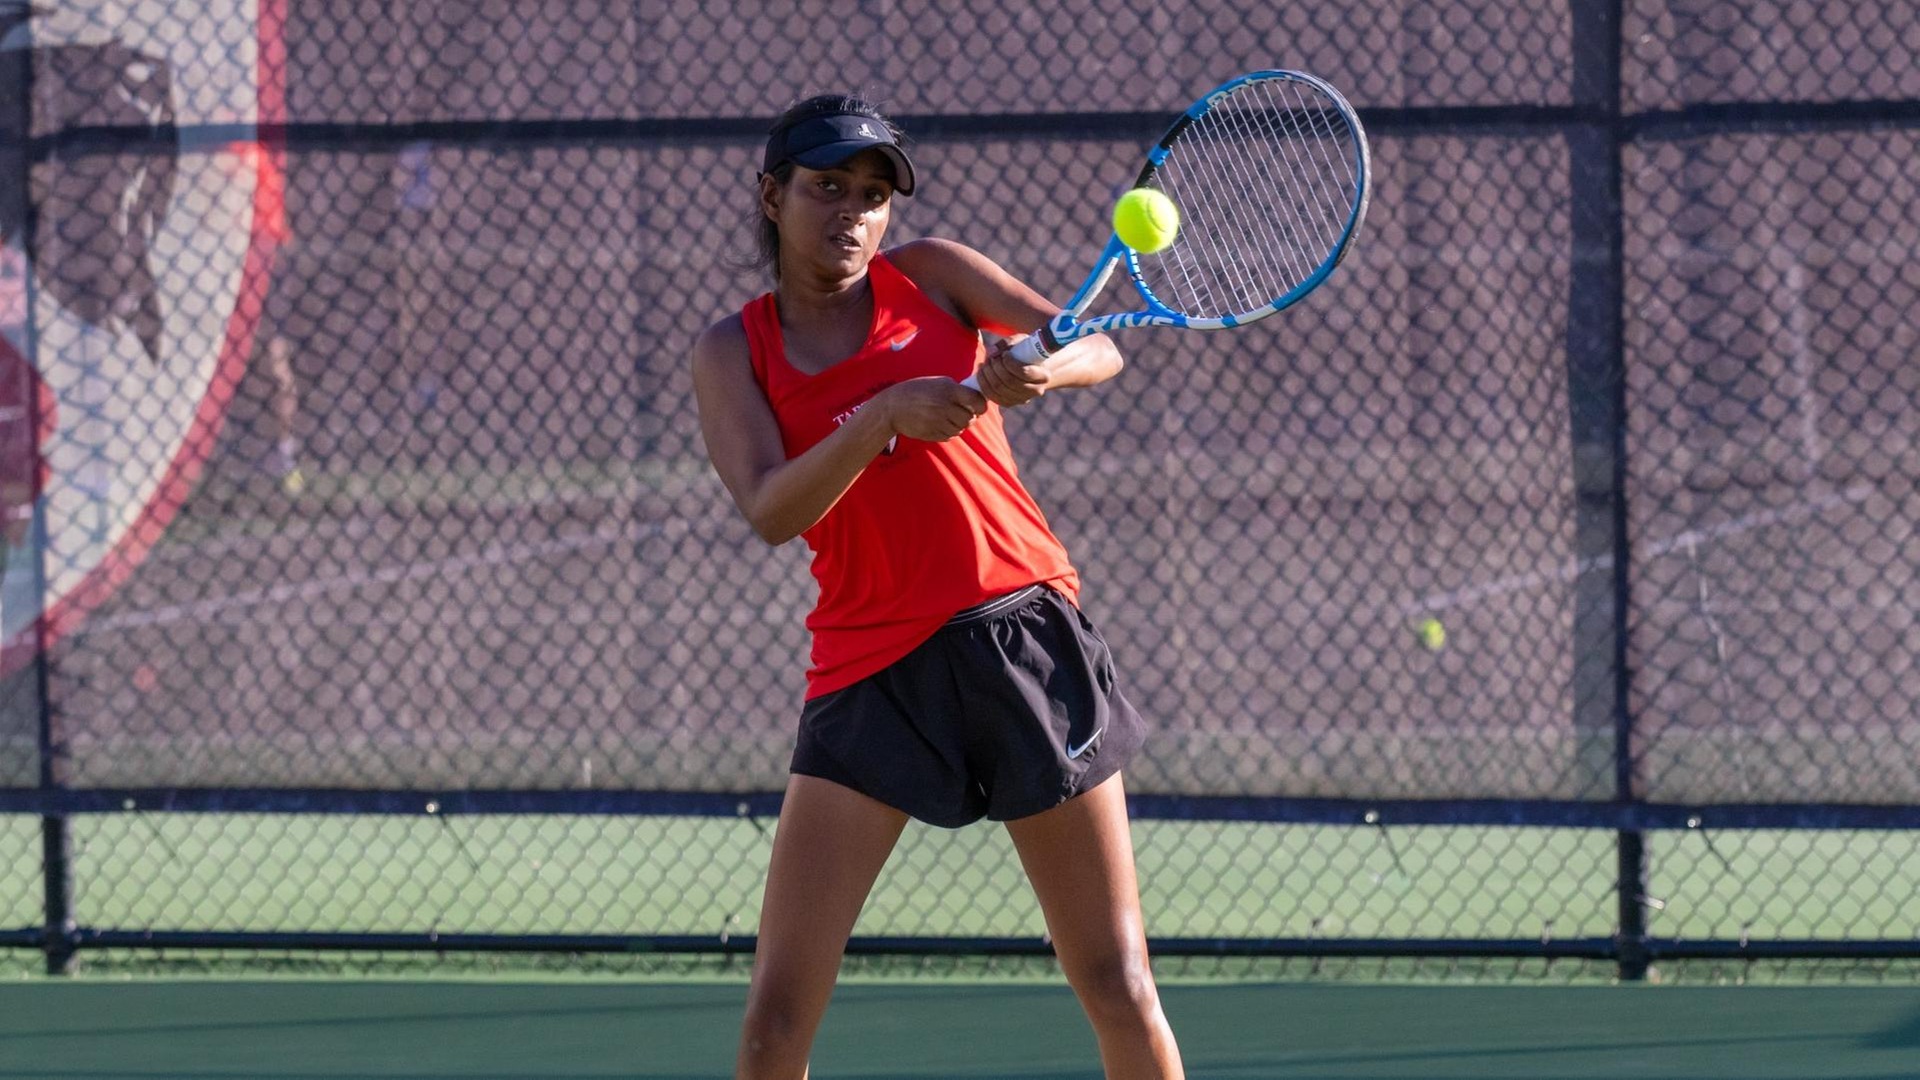 women's tennis player wearing red tank top and black shorts swing racquet at the ball